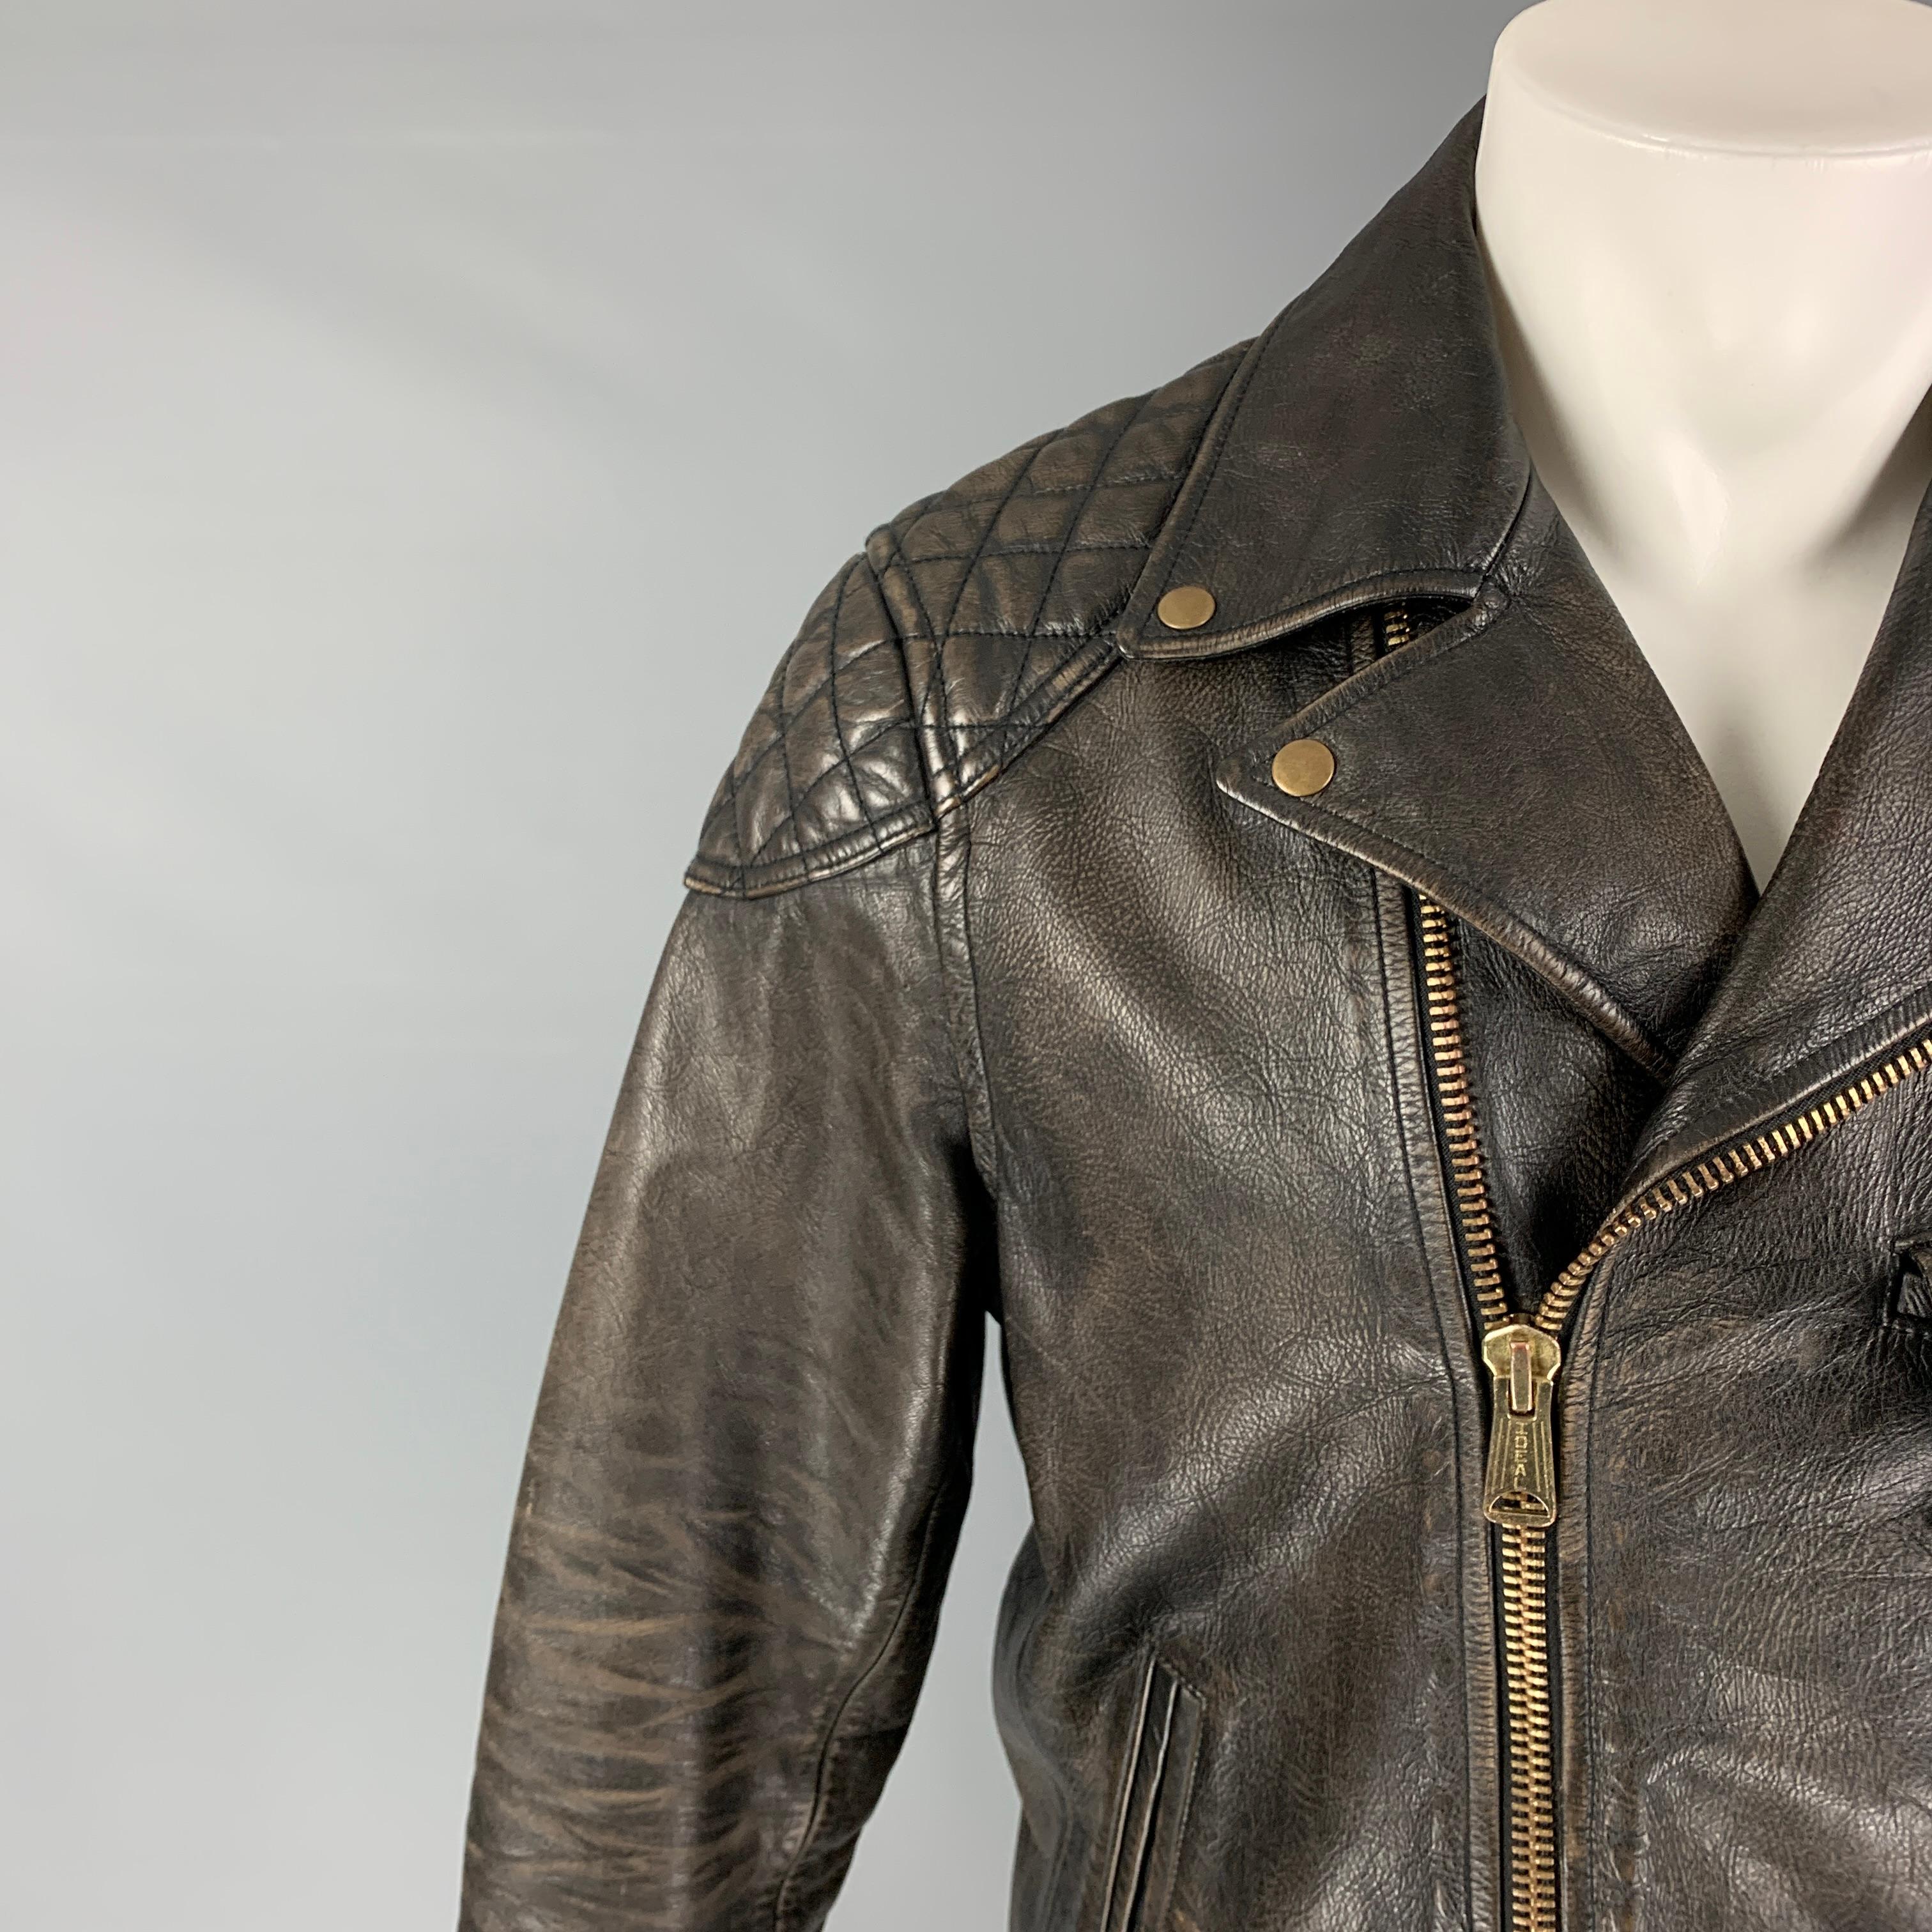 TODD SNYDER jacket comes in a brown antique horsehide leather featuring a biker style, quilted panels, front pockets, zipped sleeves, and a zip up closure. 

Very Good Pre-Owned Condition.
Marked: M

Measurements:

Shoulder: 17.5 in.
Chest: 40